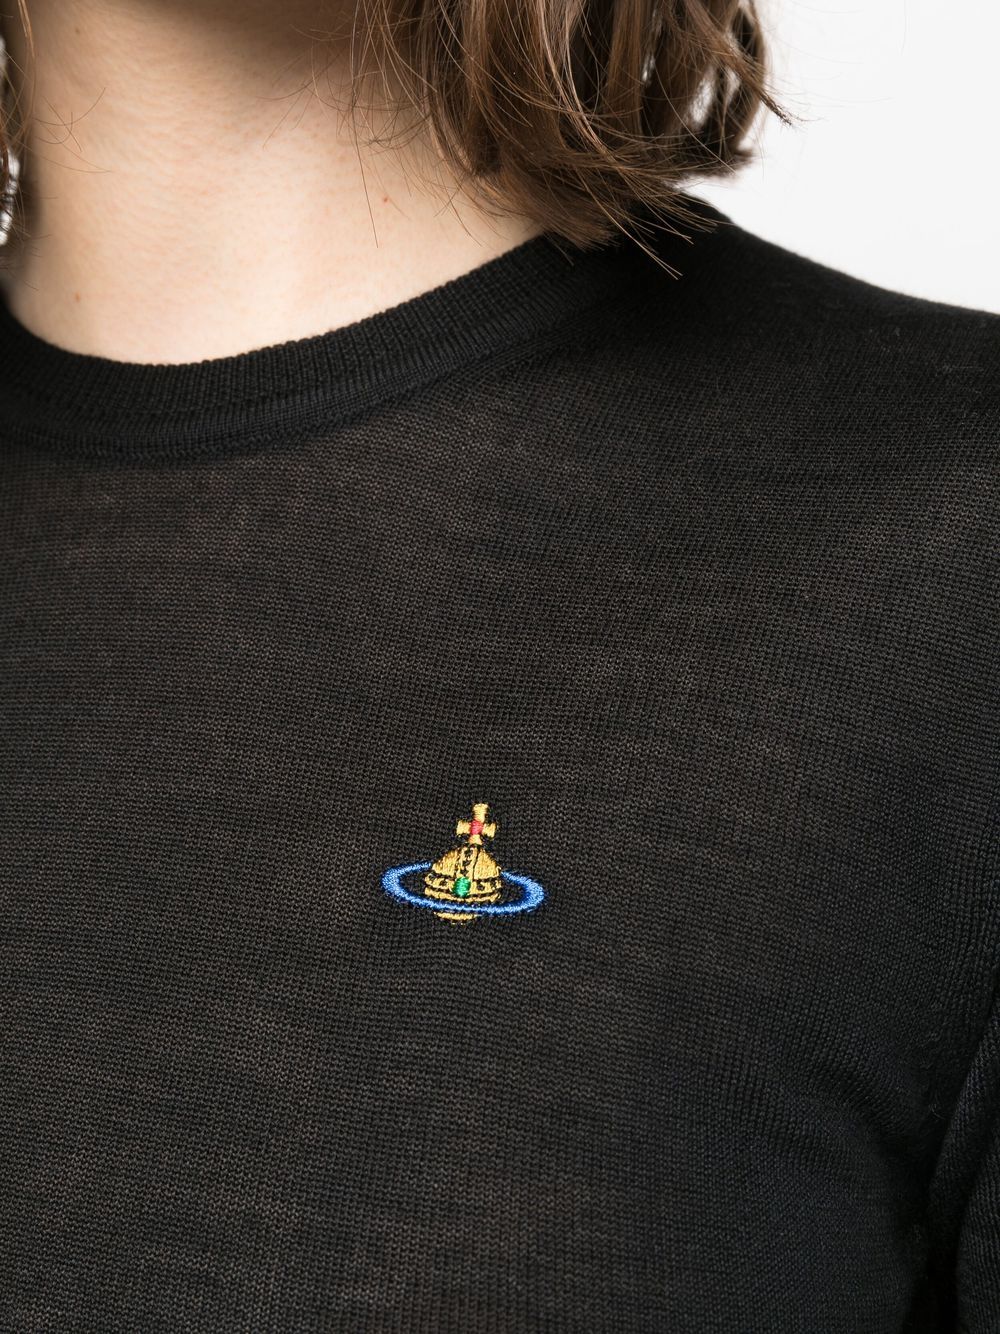 Orb-logo knitted top